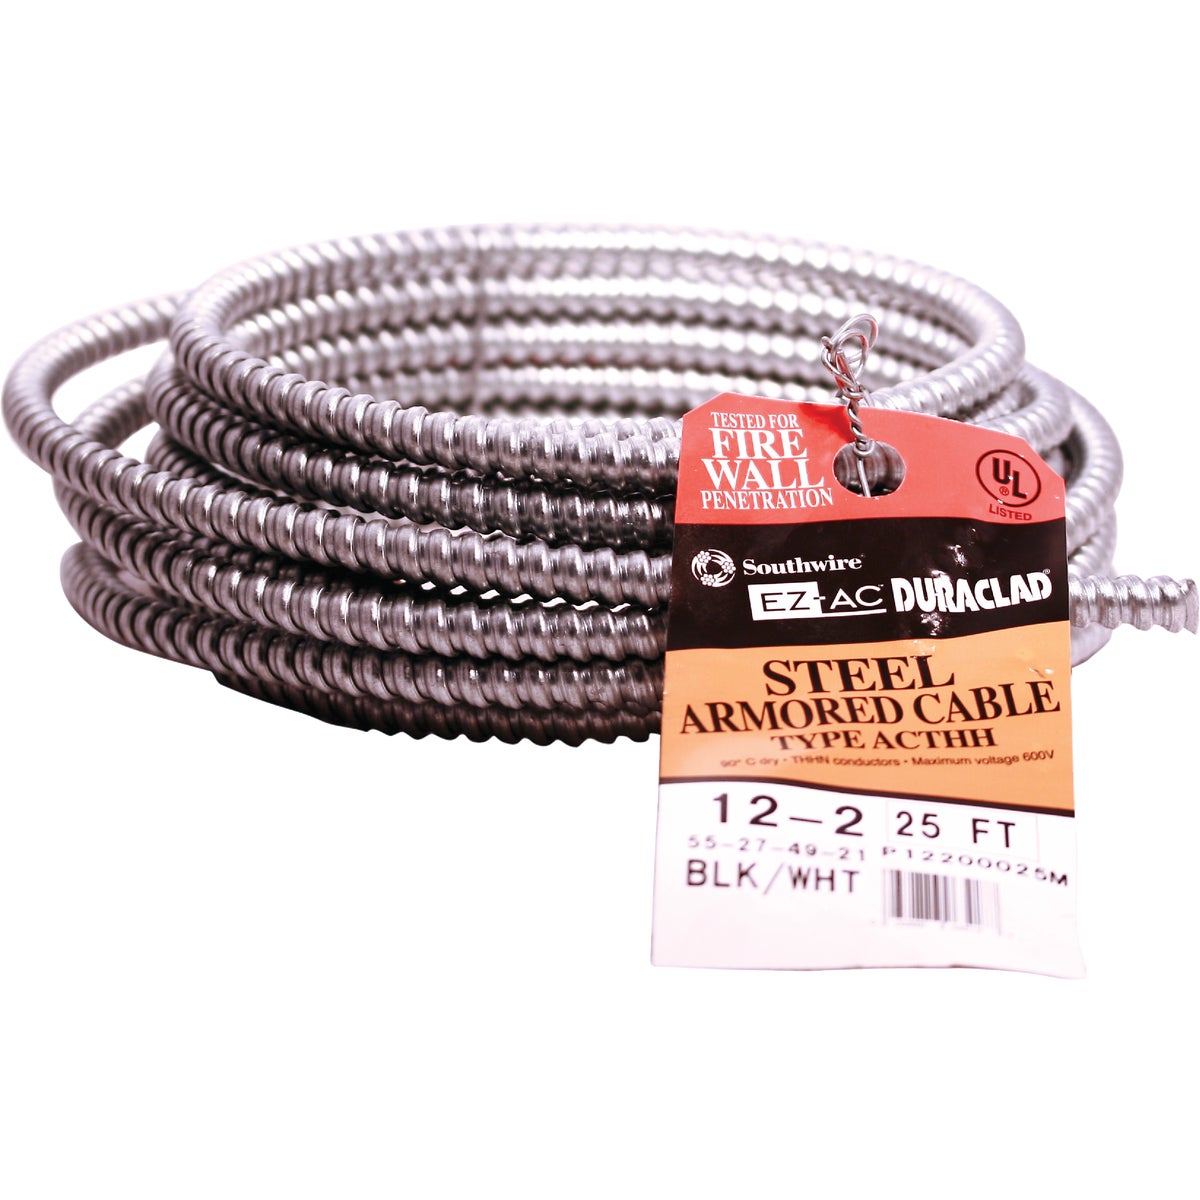 Item 509000, AC-90 steel armored cable is black striped color-coded.